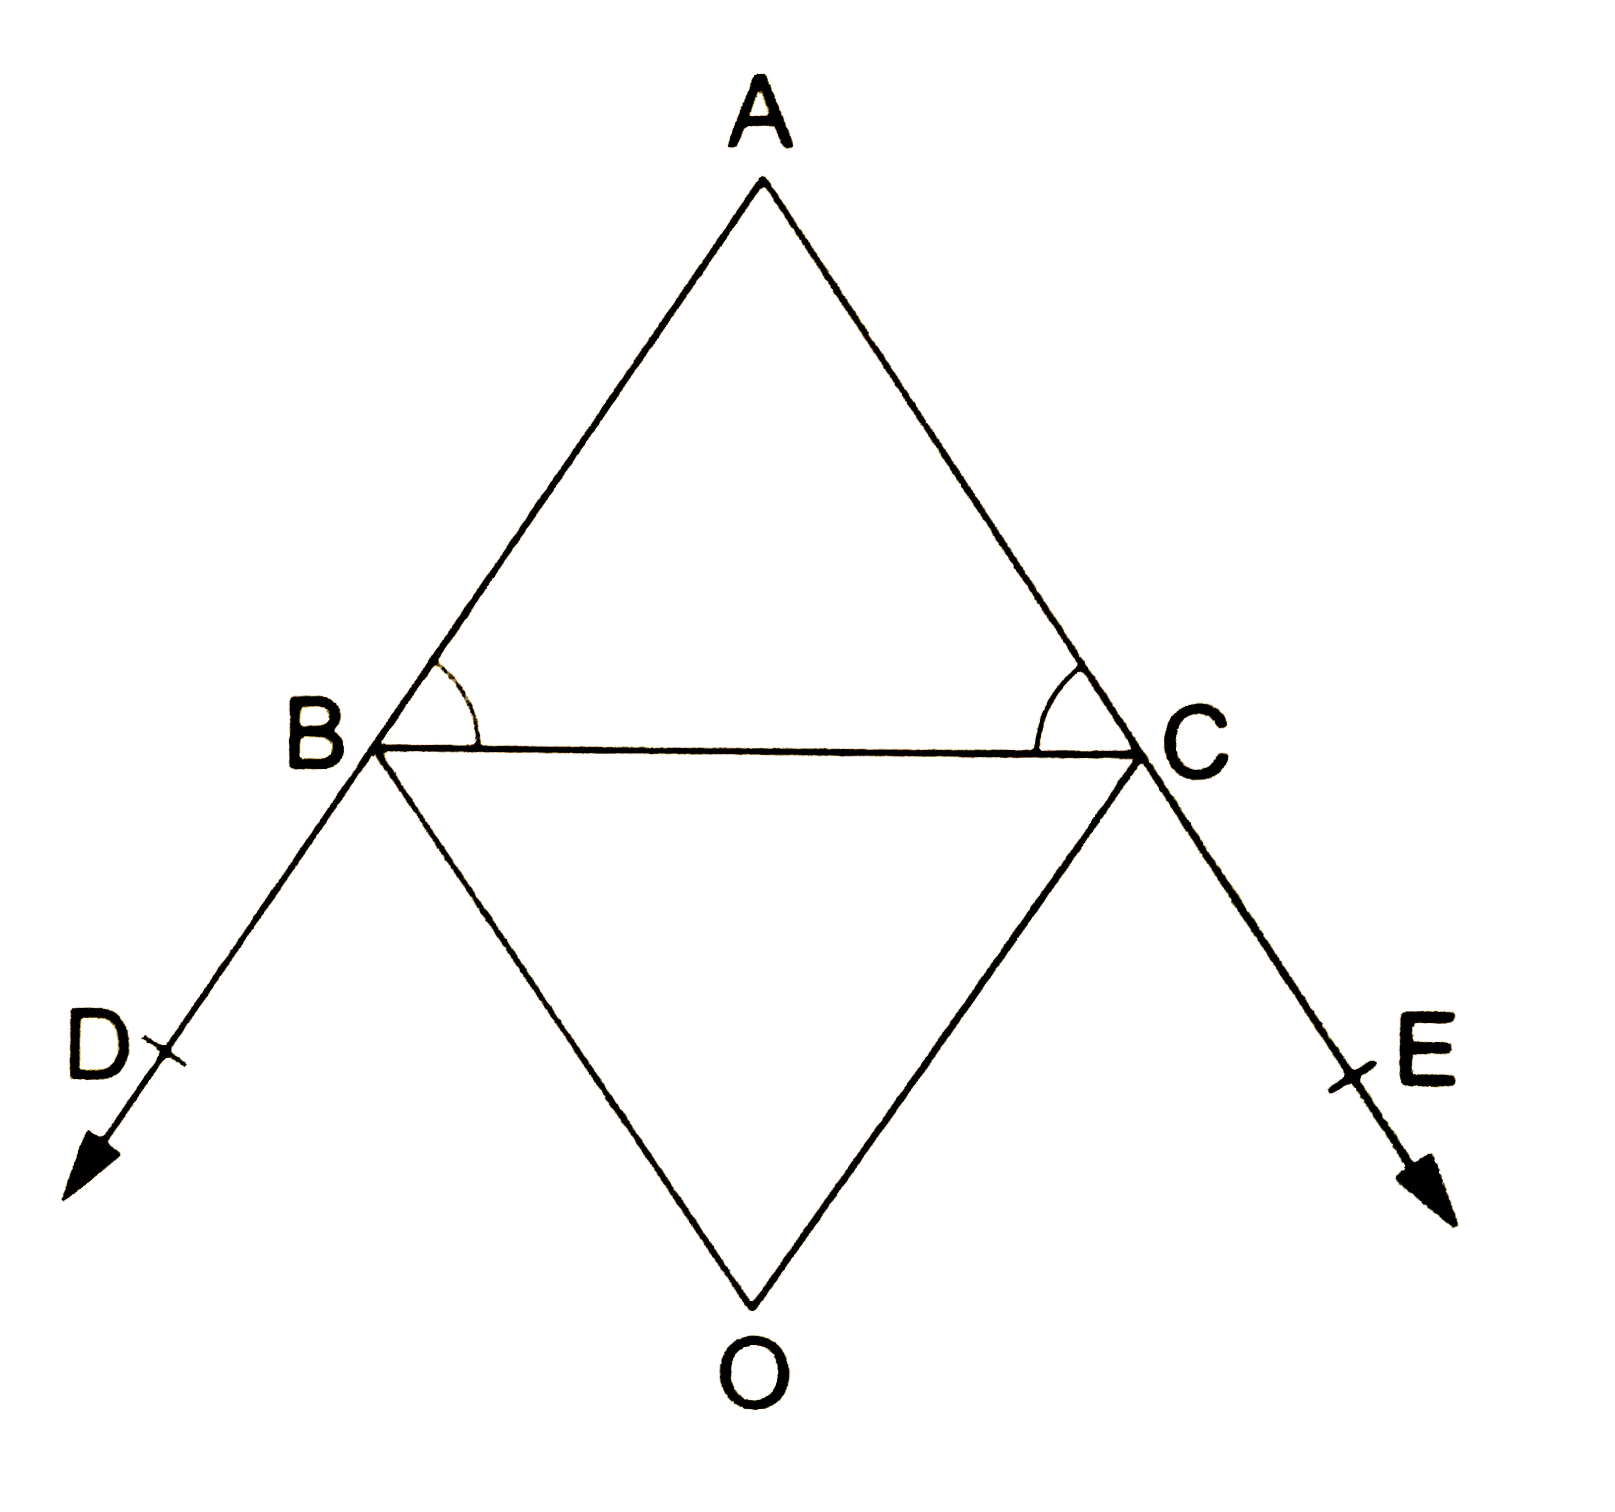 In a DeltaABC the sides AB and AC are produced to points D and E respectively. The bisectors of angleDBCandangleECB intersect  at a point O.   Prove that angleBOC=(90^(@)-(1)/(2)angleA).